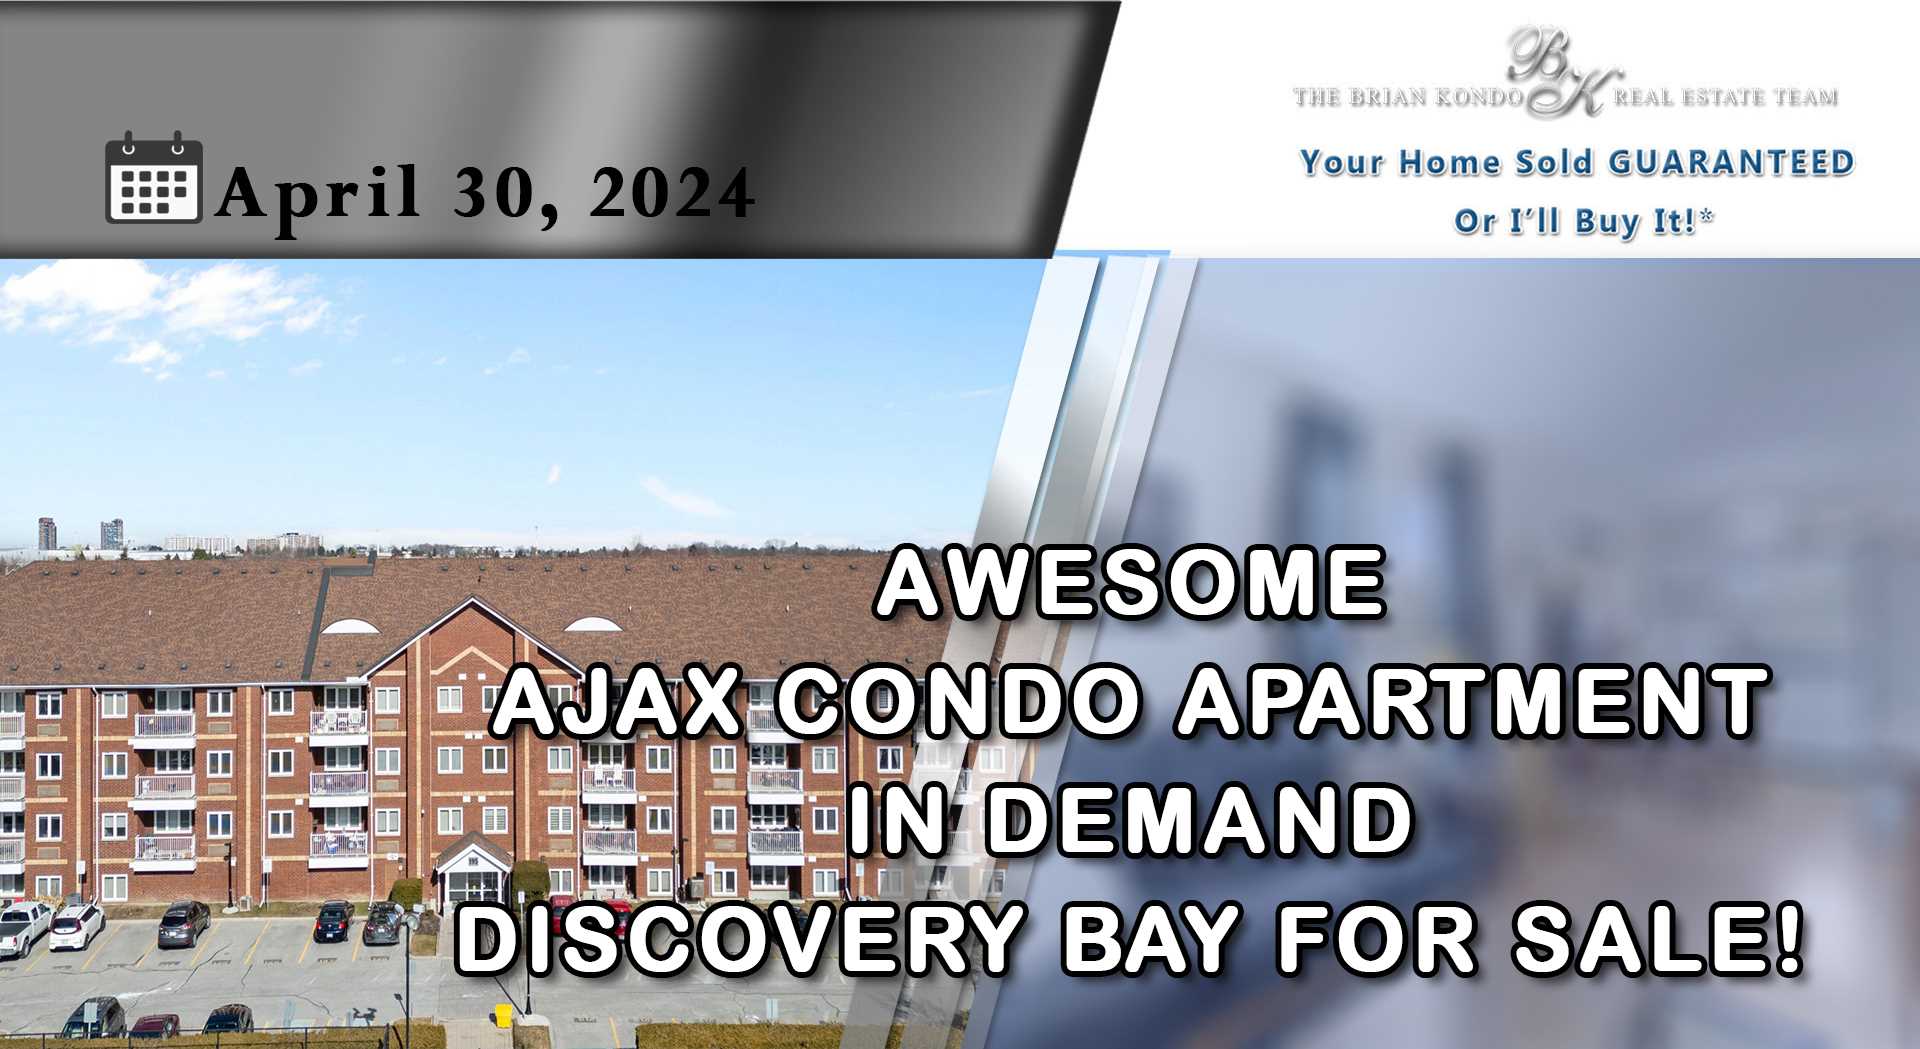 JUST LISTED: AWESOME AJAX CONDO APARTMENT IN DEMAND DISCOVERY BAY FOR SALE!